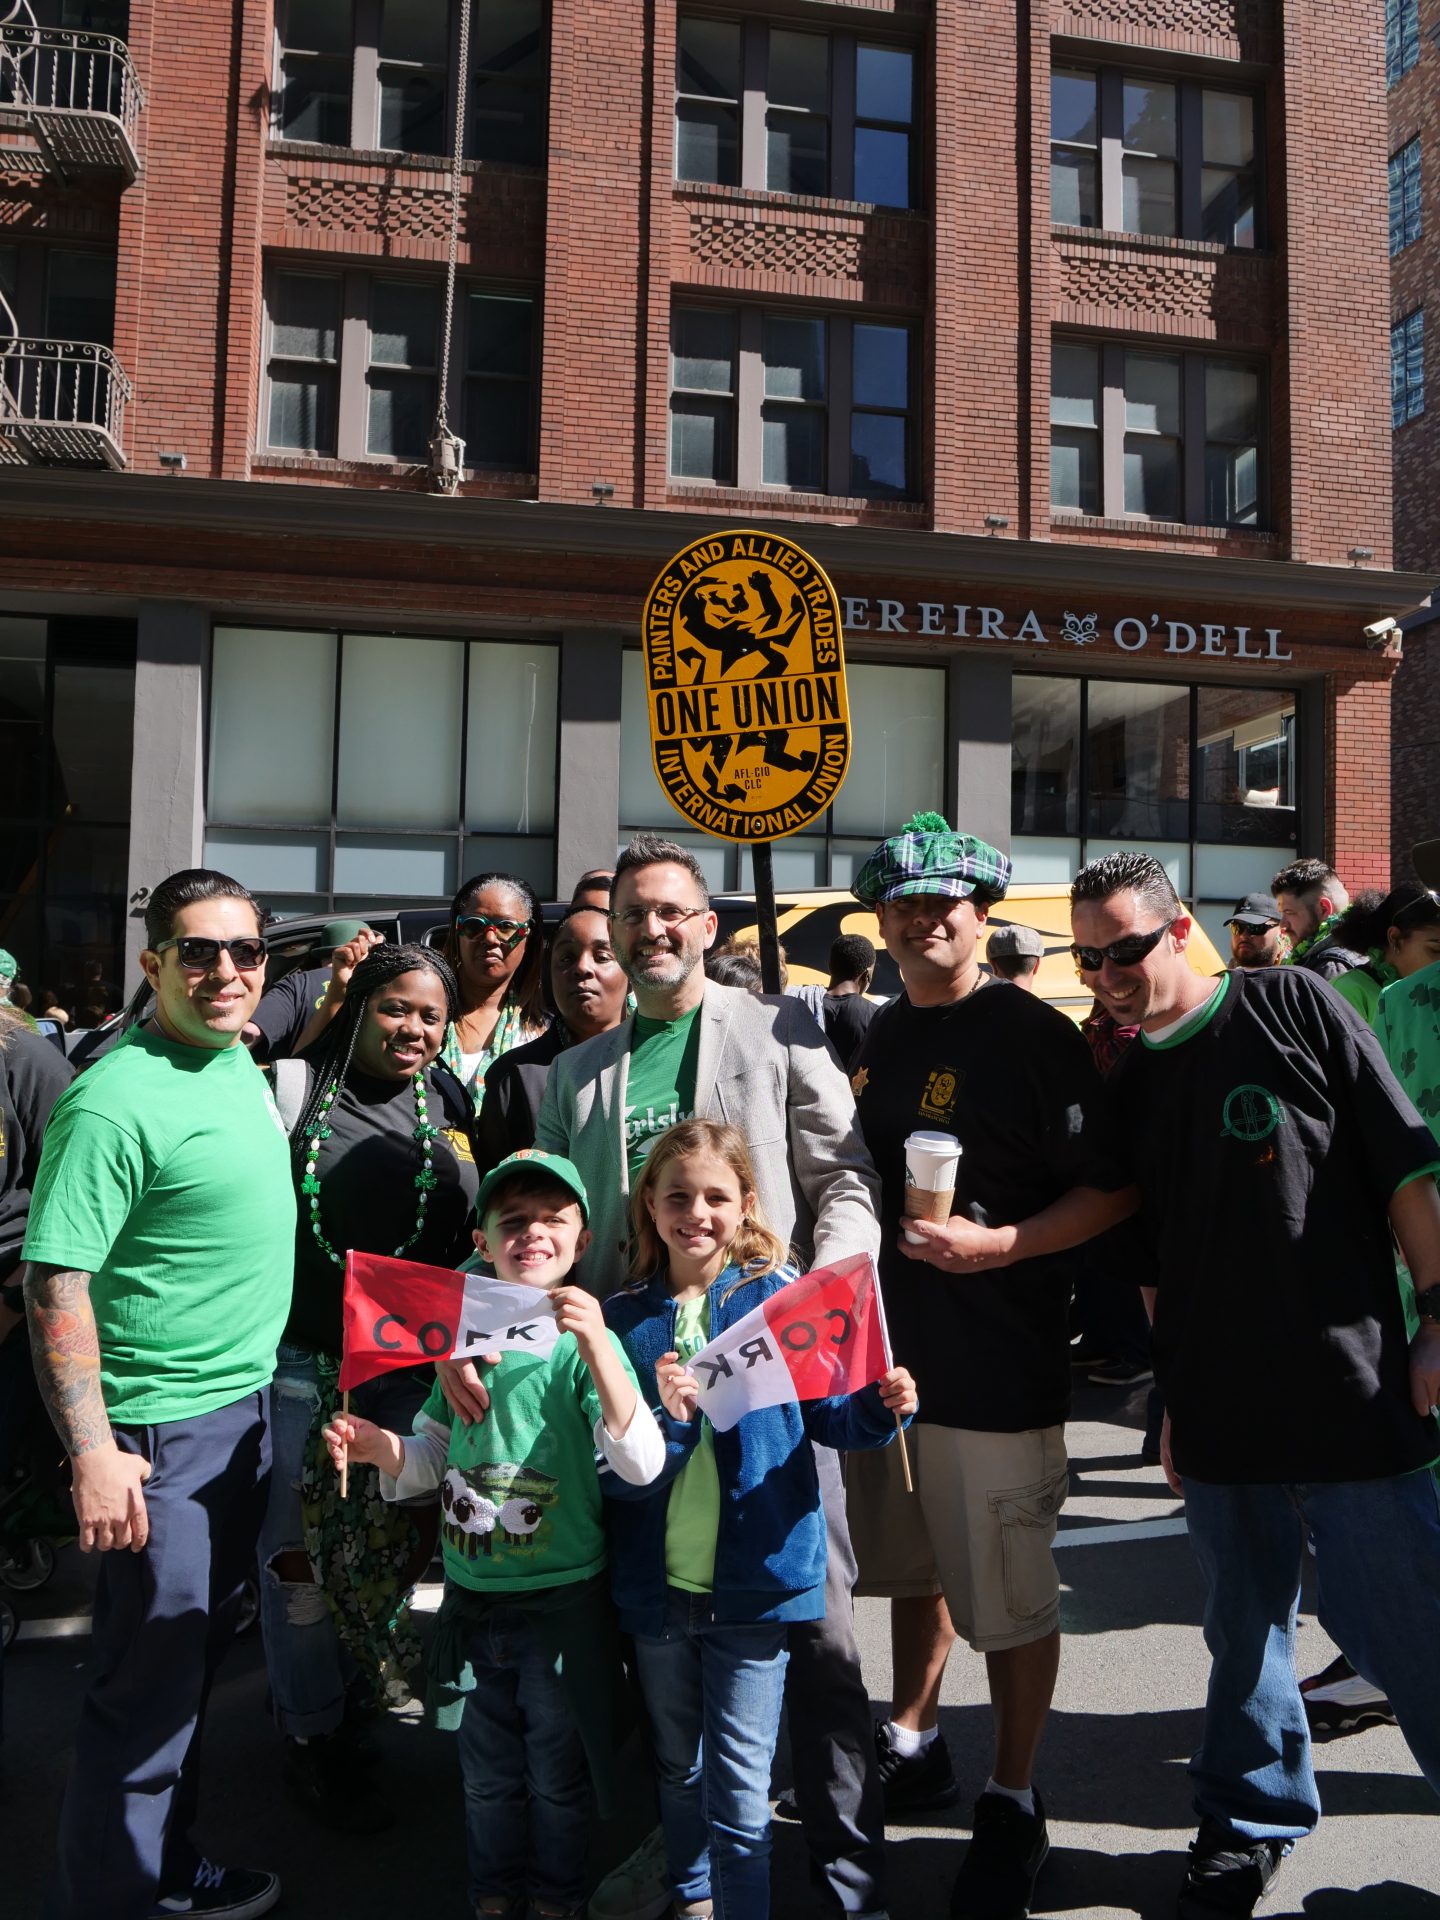 Image from the Gallery: St. Patrick’s Day Parade – San Francisco, CA